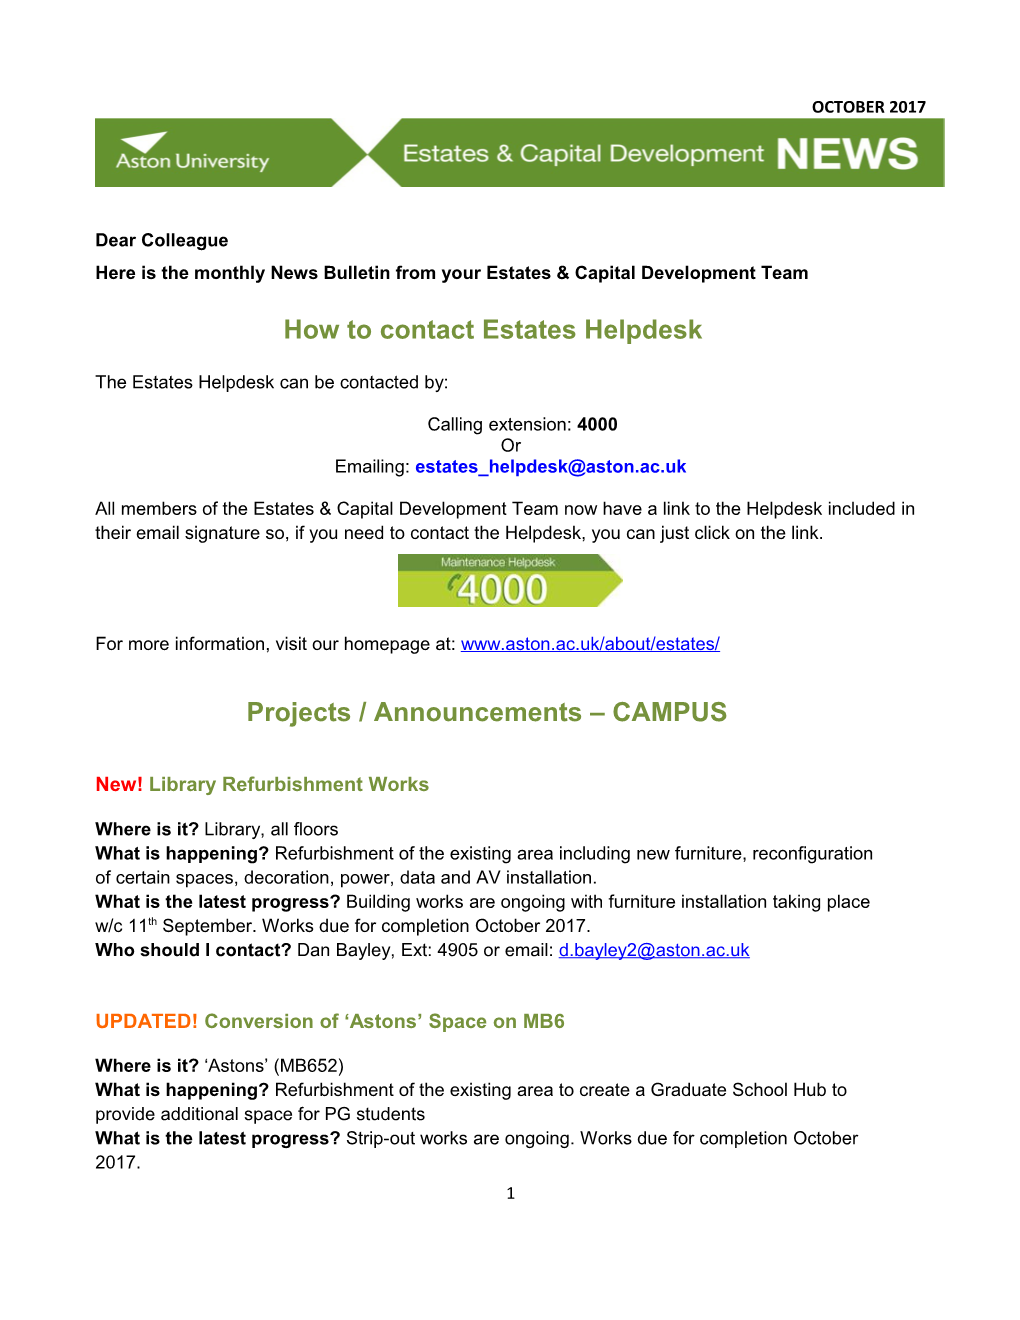 Here Is the Monthly News Bulletin from Your Estates & Capital Development Team